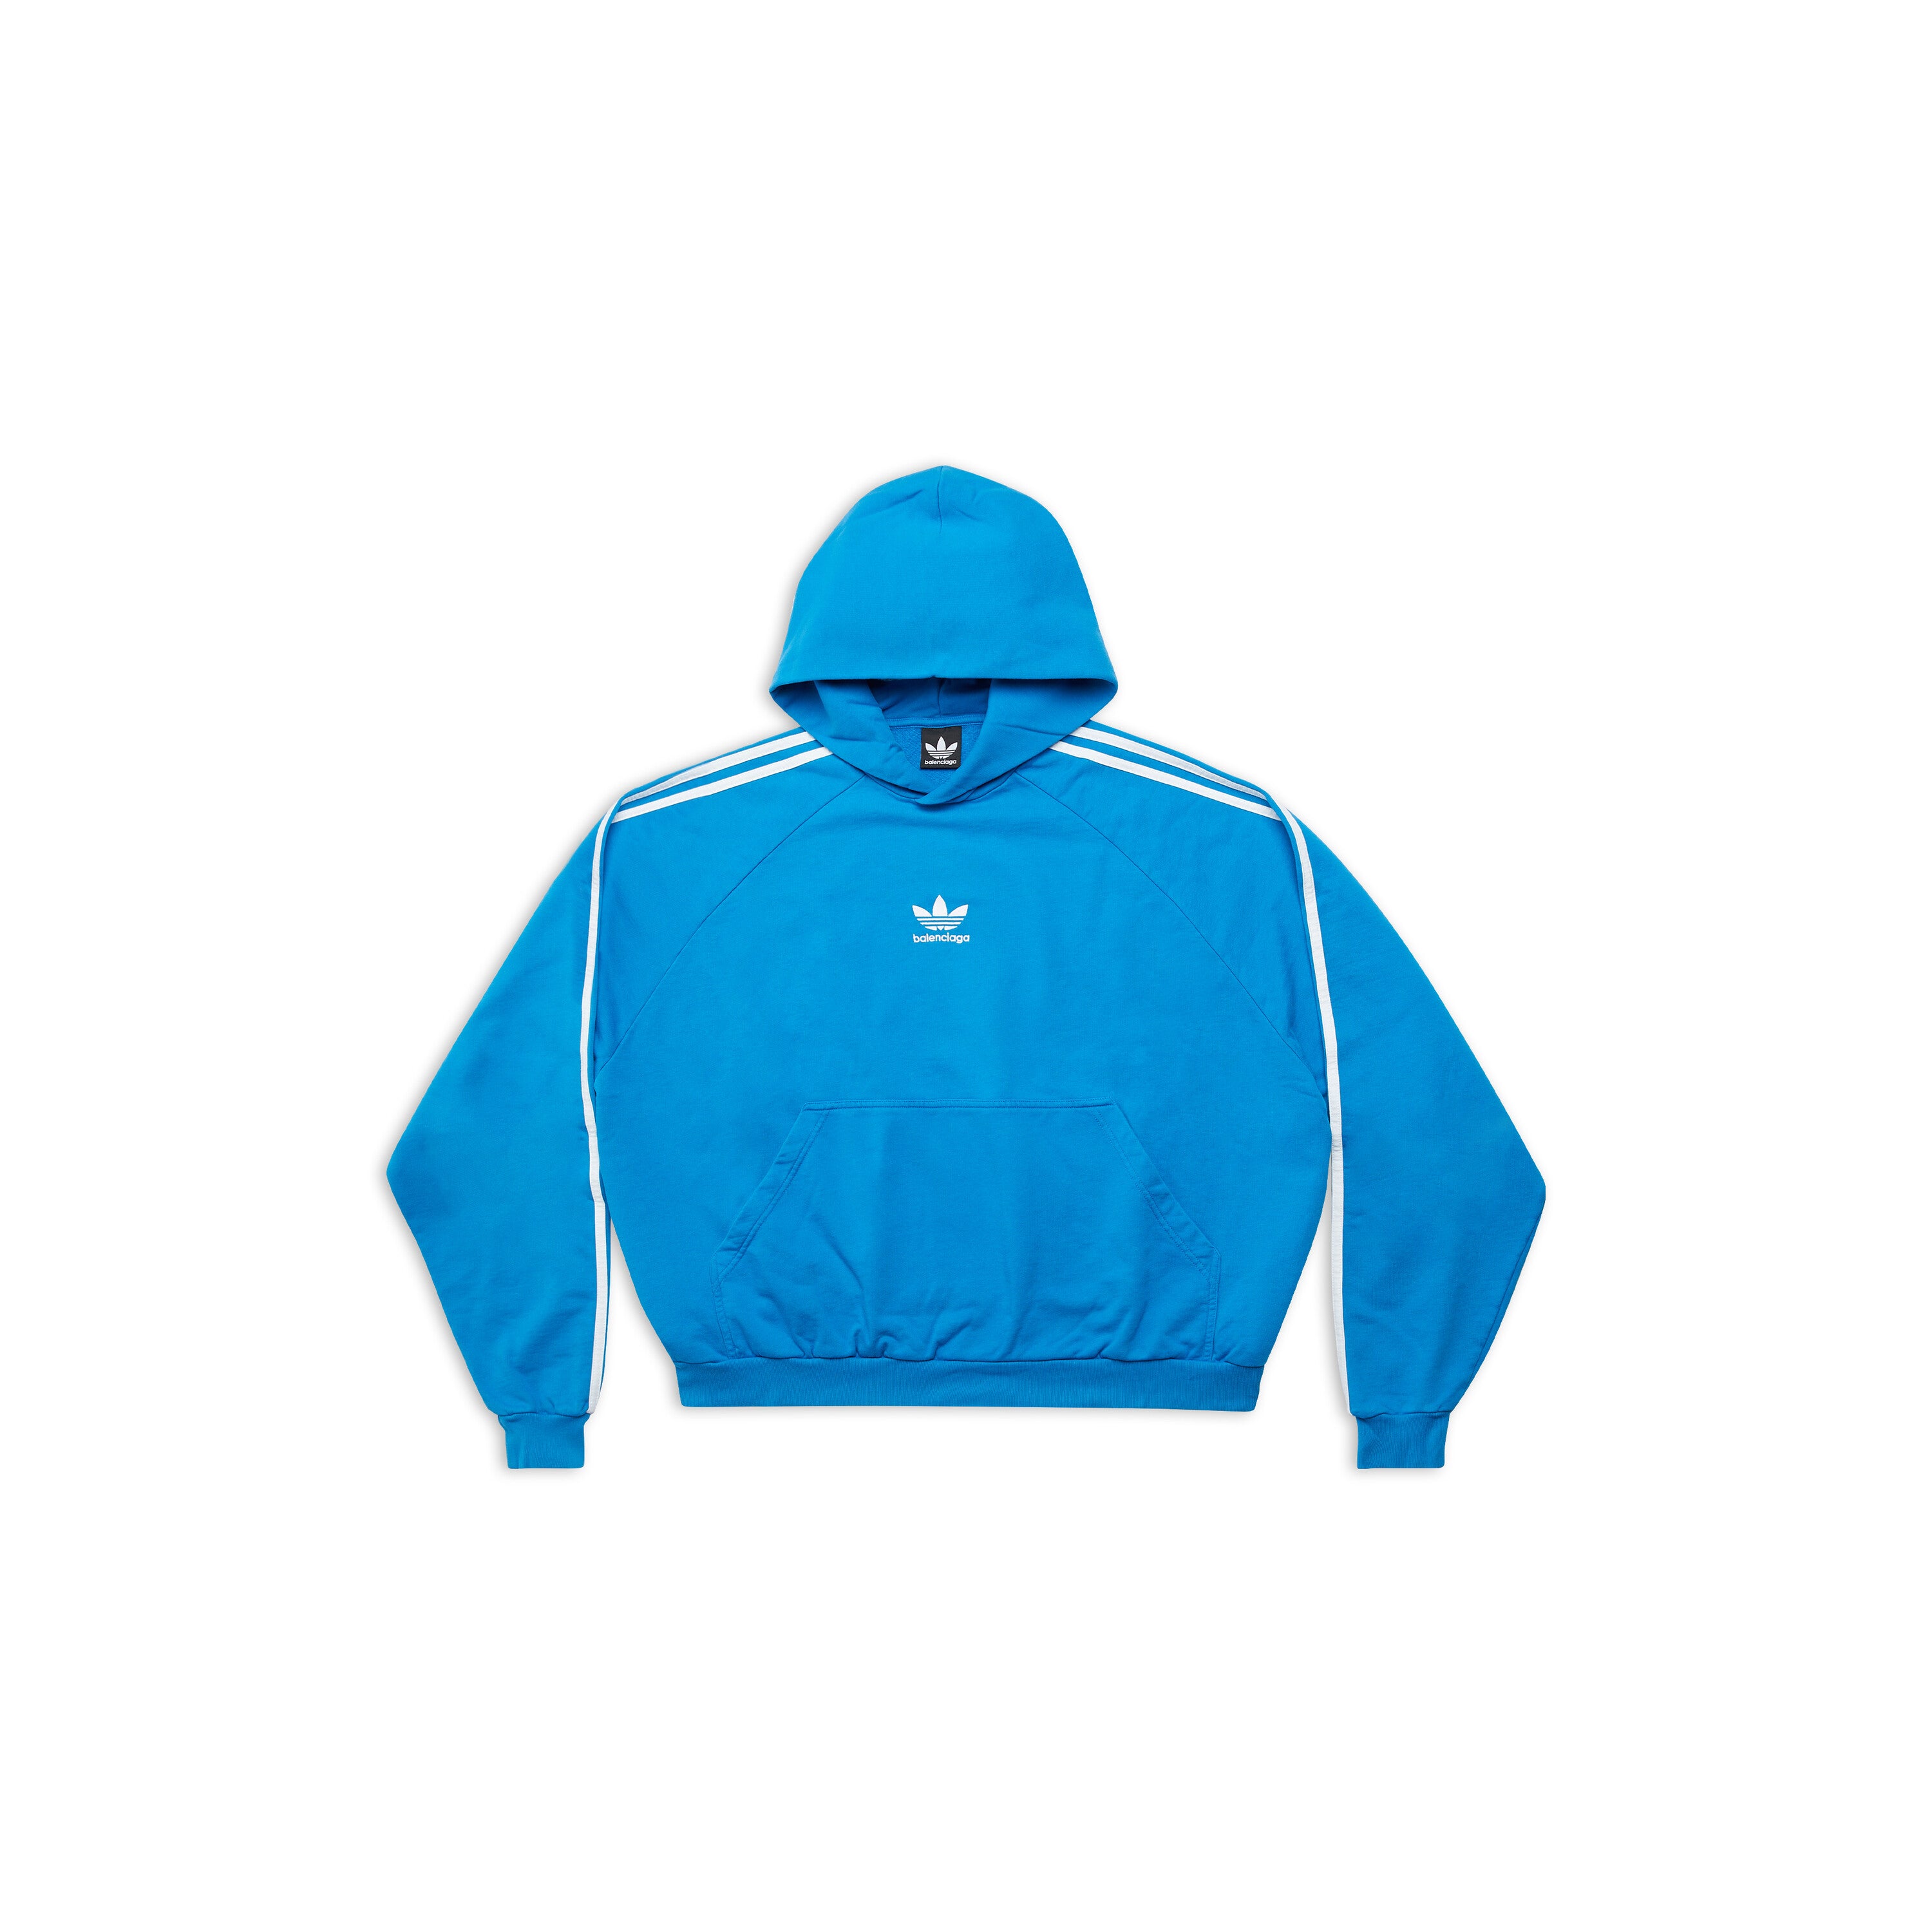 BALENCIAGA / ADIDAS HOODIE LARGE FIT IN BLUE – Lux Afrique Boutique